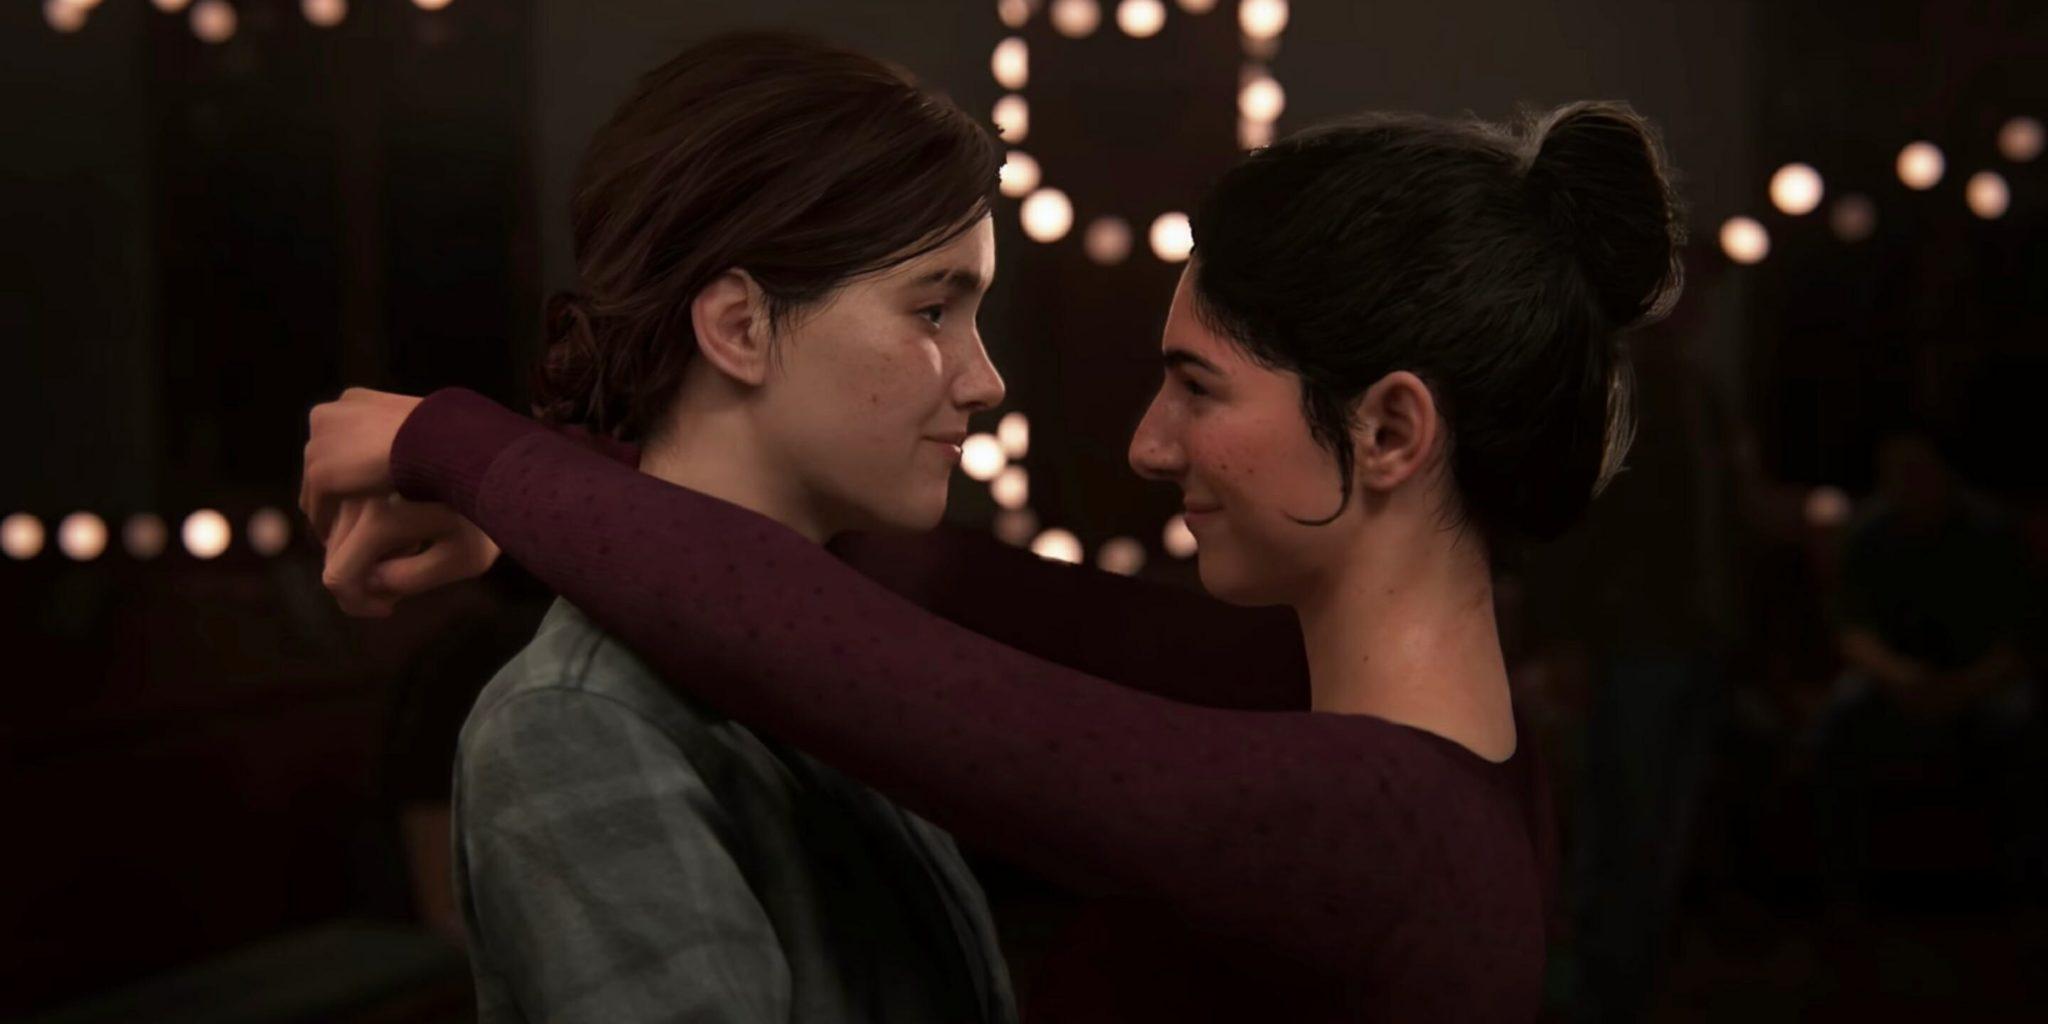 Ellie and Dina's blossoming relationship features heavily in the Last of Us Part II leaks.